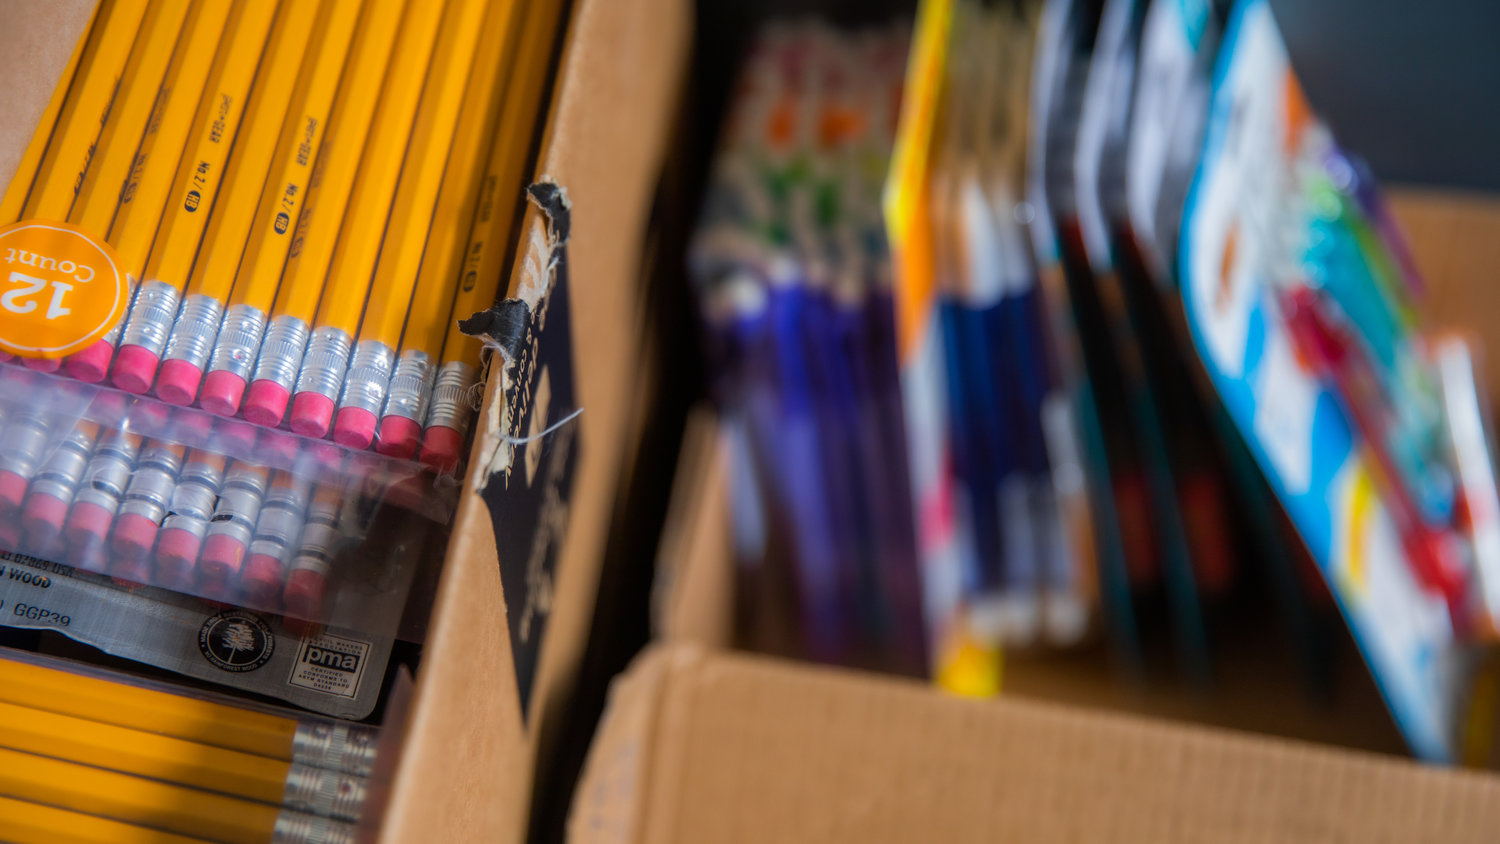 The Centralia Back to School Supply Drive will take place on Aug. 5 and 6 from 8 a.m. to 5 p.m. at the Chehalis Walmart.
 The drive will be accepting all school supply donations, such as new backpacks, pens, pencils, crayons, wet wipes, tissues, sanitizer, notebooks, paper, shoes and back-to-school clothing to the “stuff-the-bus” event at the Chehalis Walmart. Monetary donations will be accepted at the event or delivered to the United Way of Lewis County, c/o Centralia Supply Drive, 450 NW Pacific Ave., Chehalis. To learn more, donate or volunteer, contact Holly Abbarno at hollyabbarno@yahoo.com.